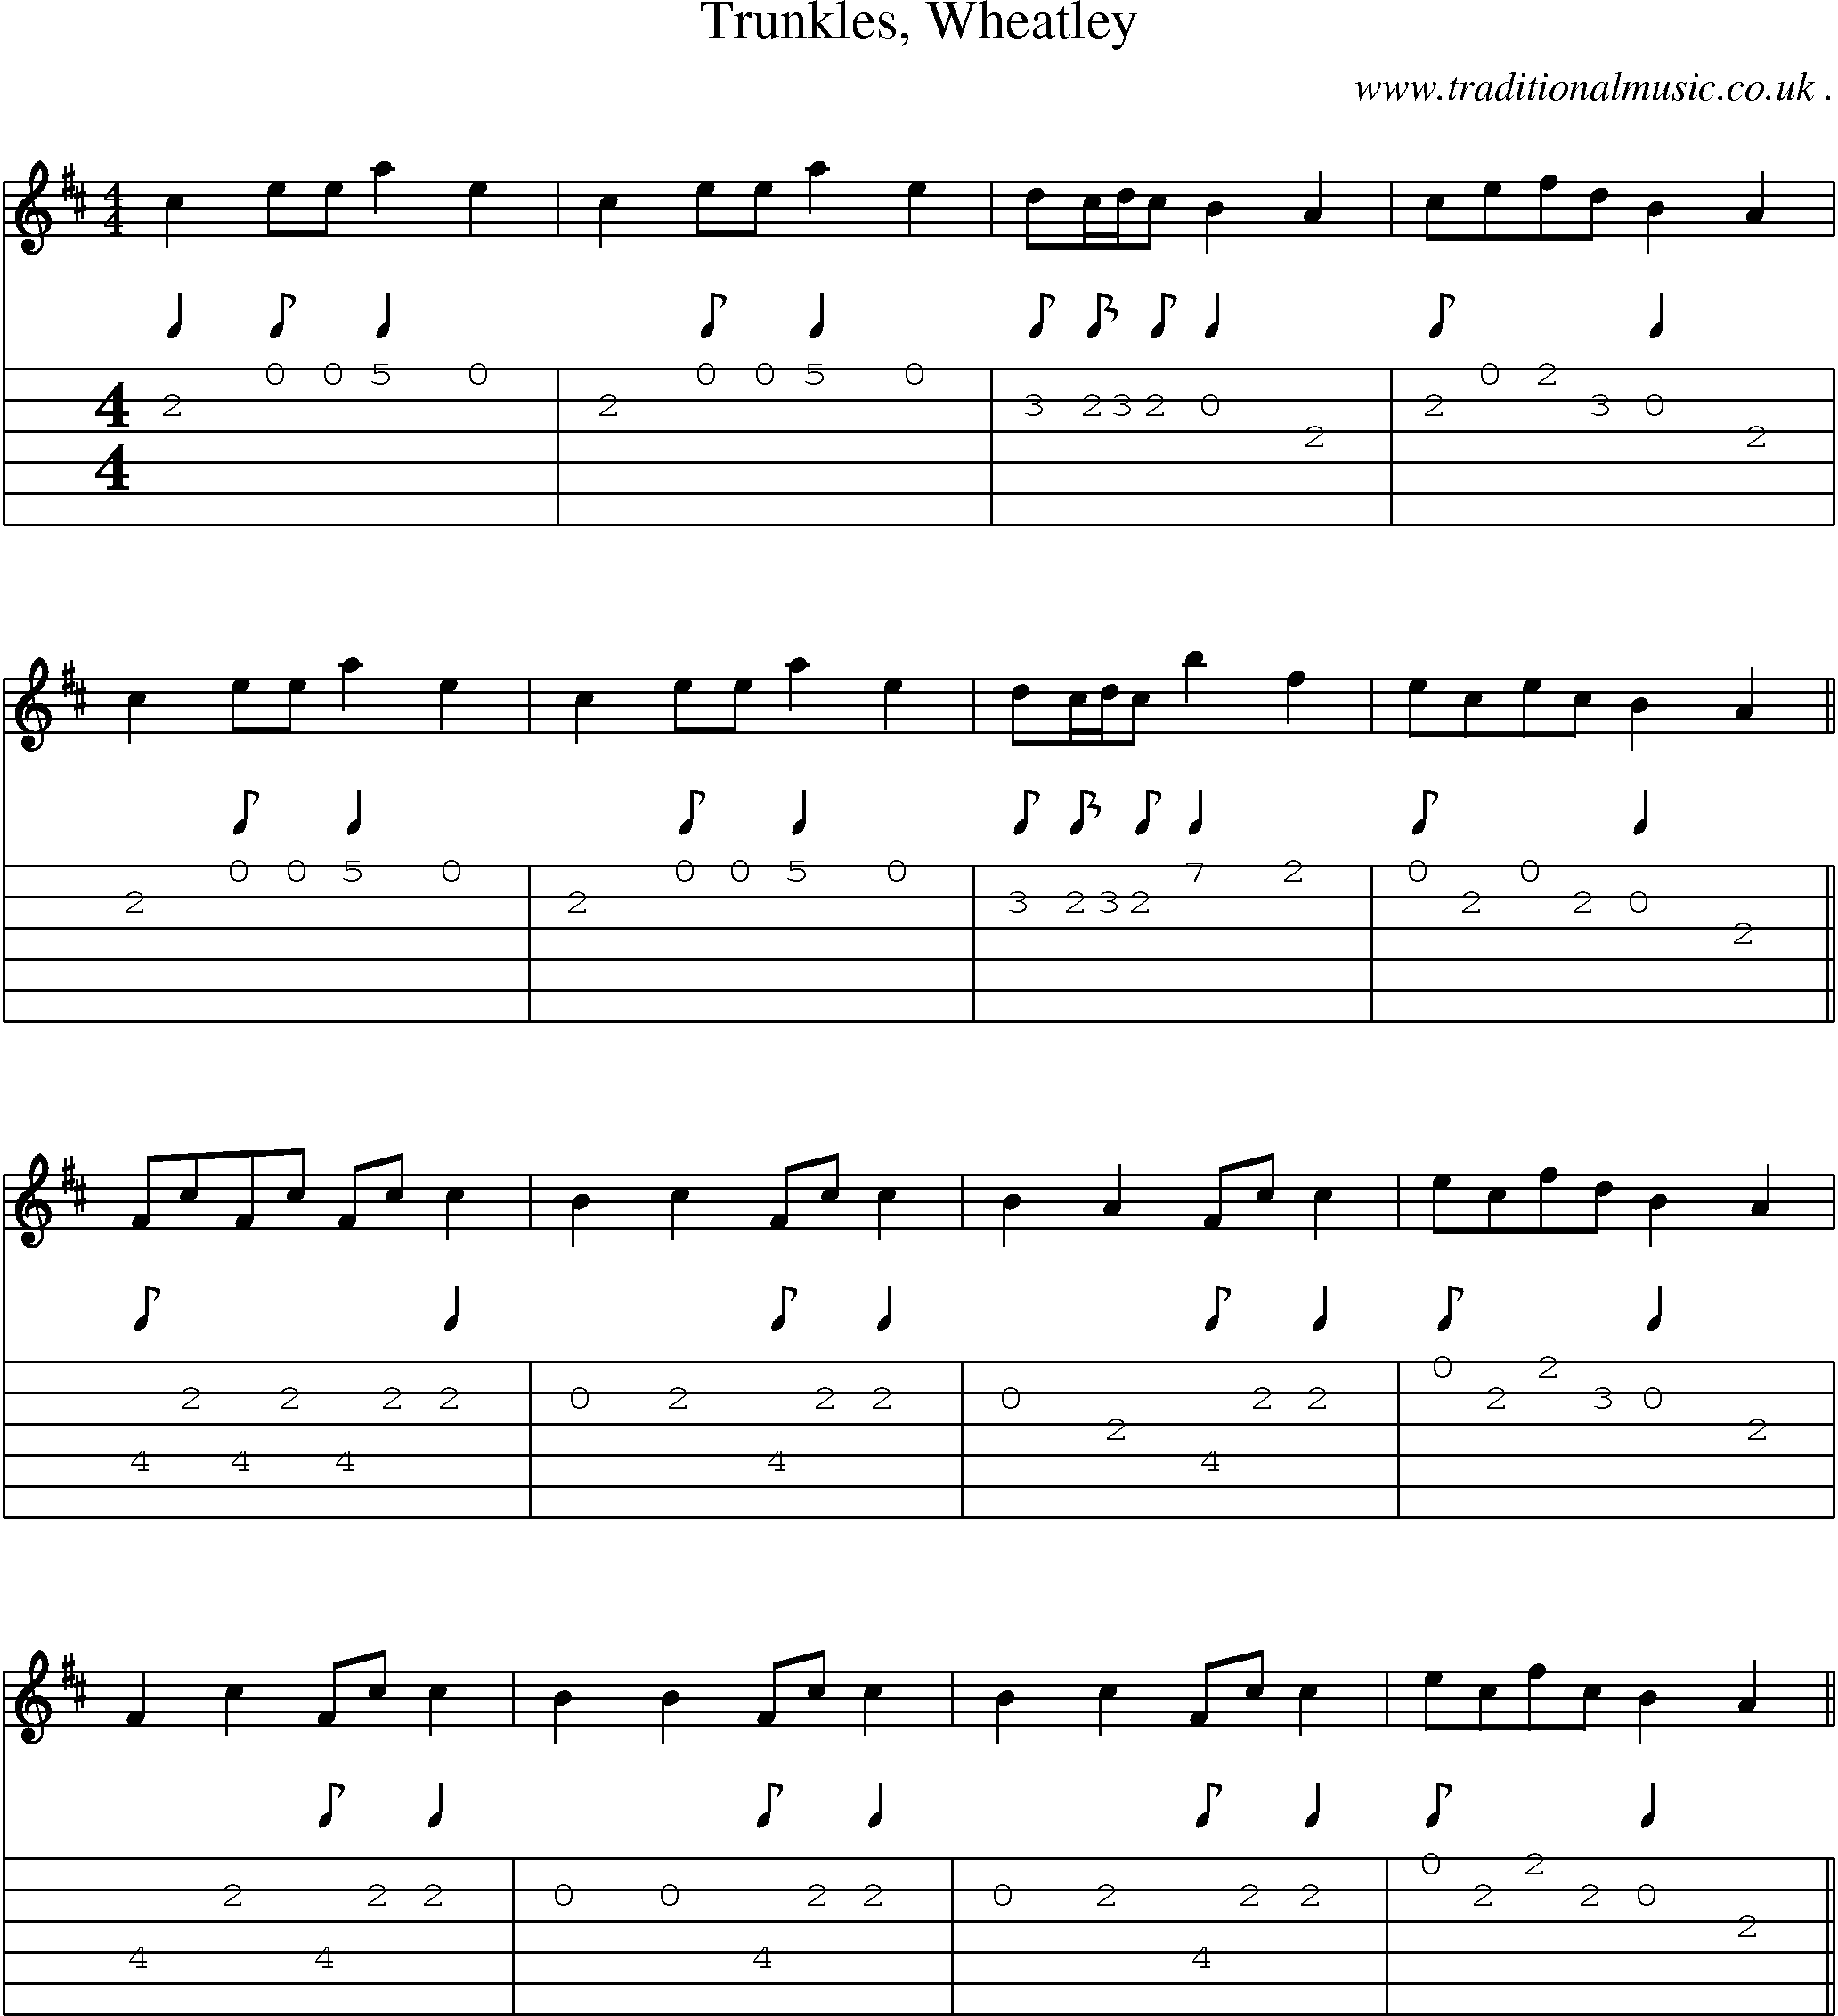 Sheet-Music and Guitar Tabs for Trunkles Wheatley